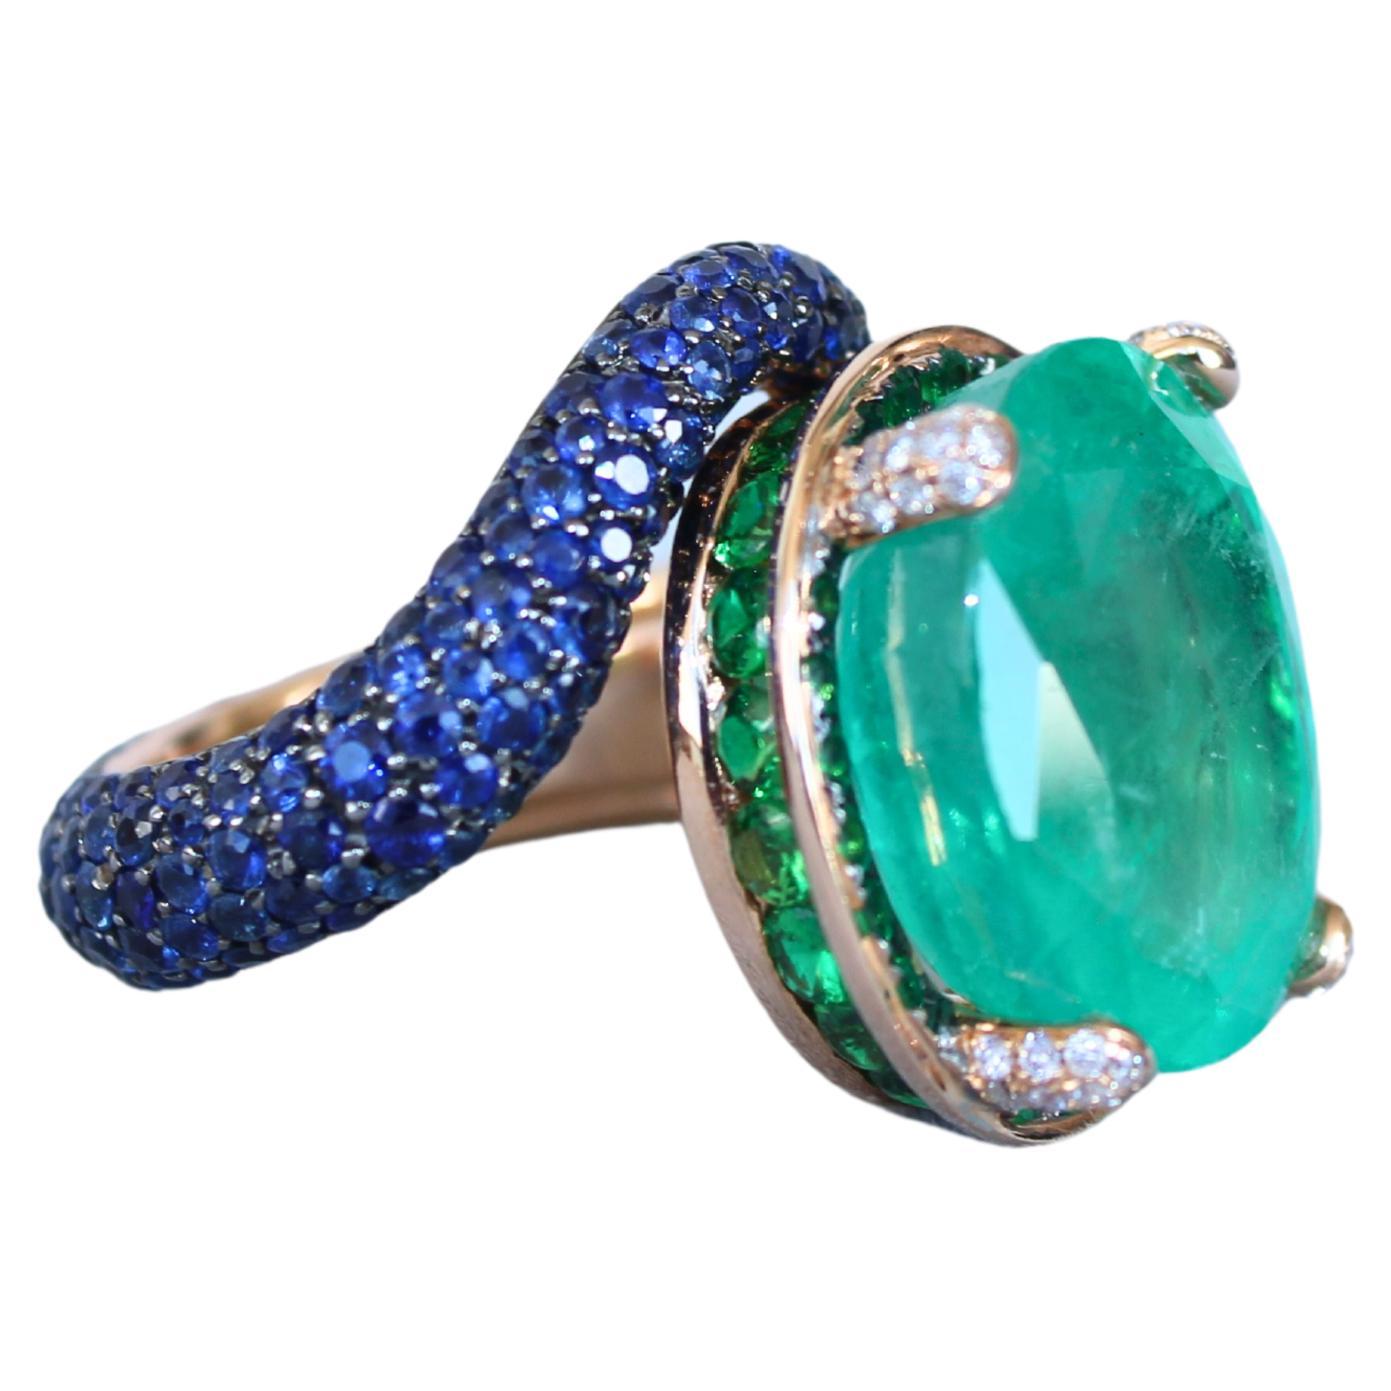 Large Oval Cut Emerald Full Pave Tsavorites Diamonds Sapphires 18K Gold Ring For Sale